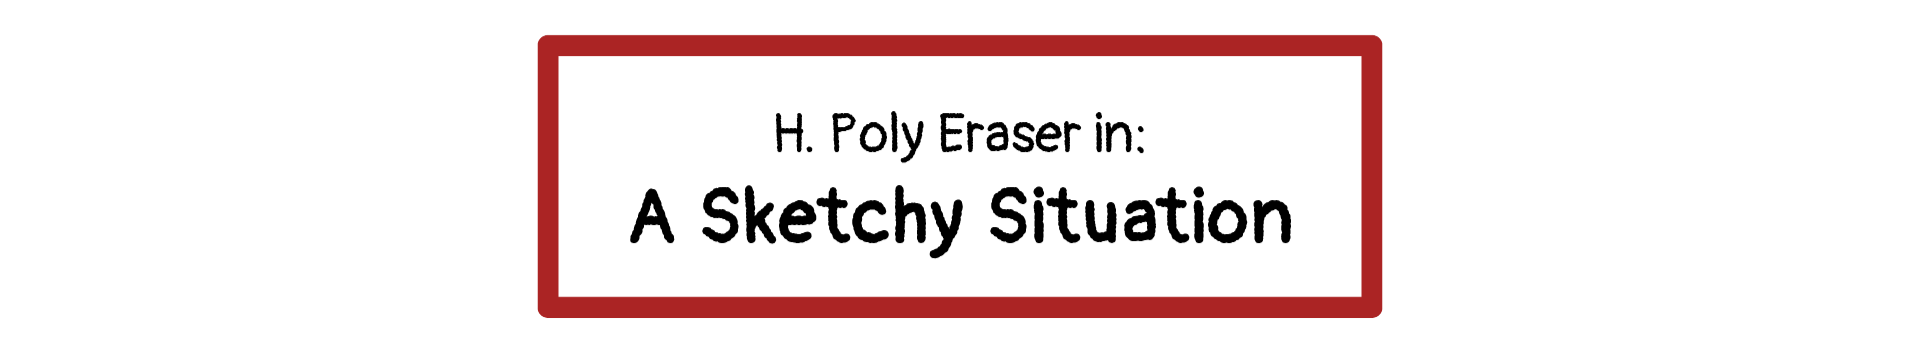 H Poly Eraser in: A Sketchy Situation